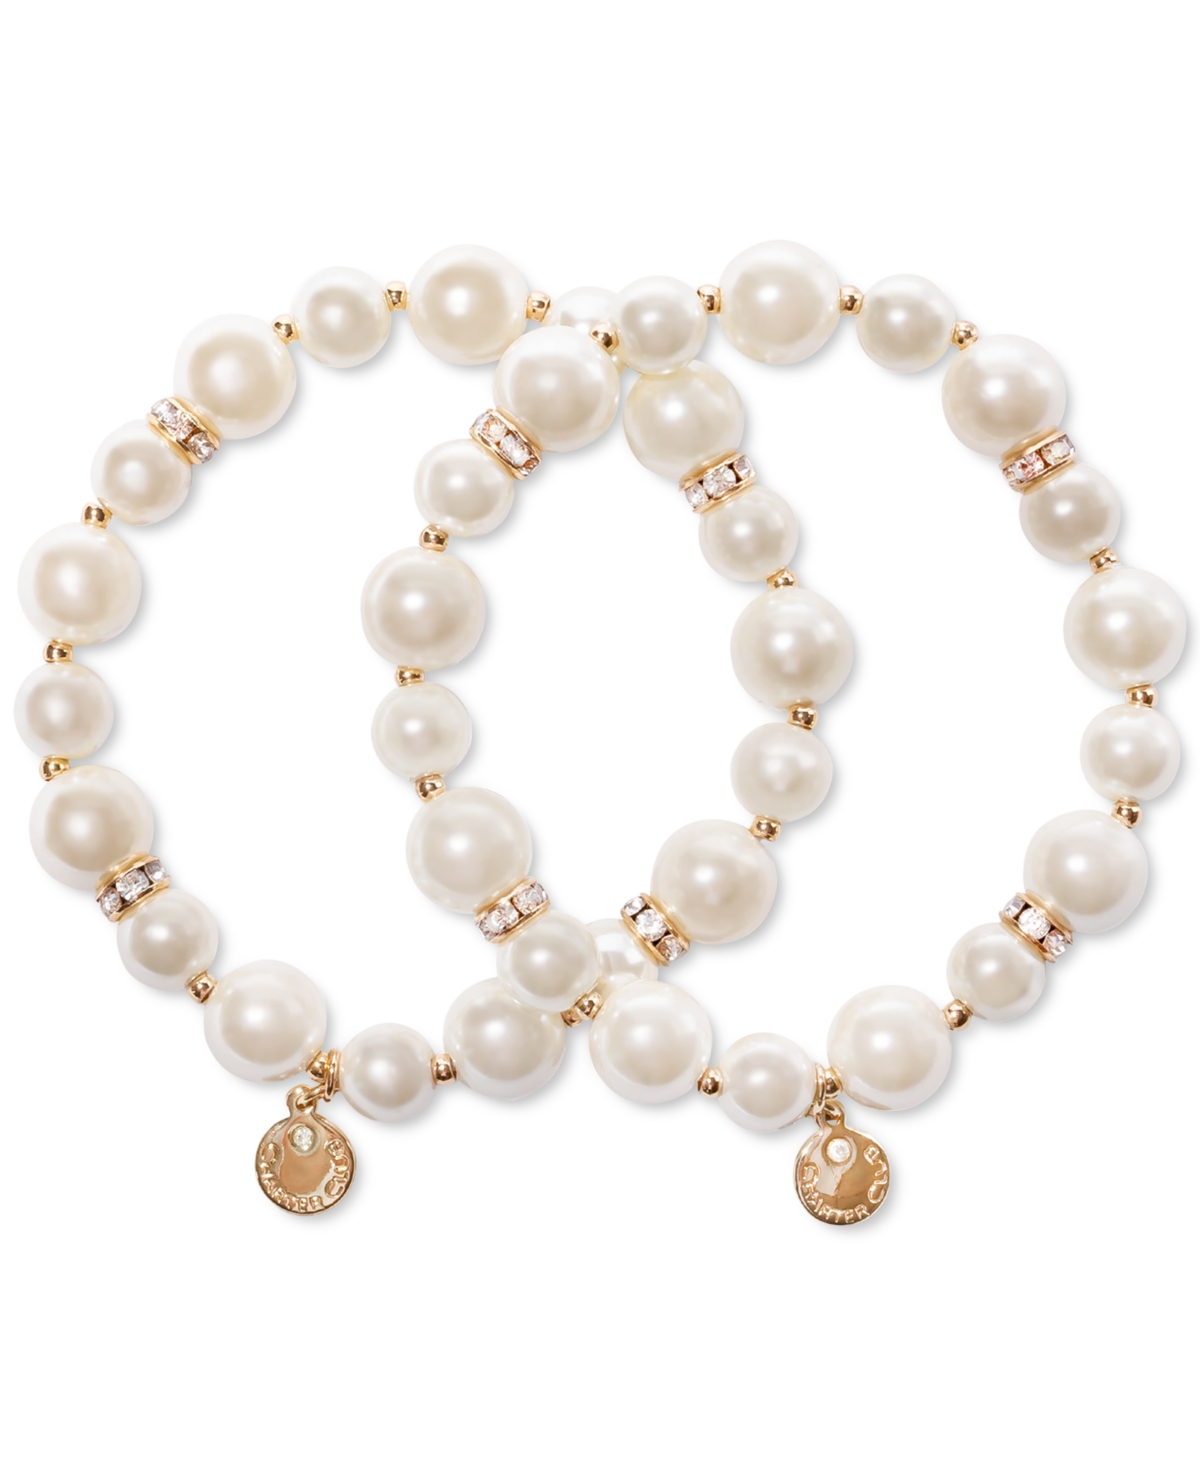 Gold-Tone 2-Pc. Set Pave Rondelle & Imitation Pearl Beaded Stretch Bracelets, Created for Macy's - White